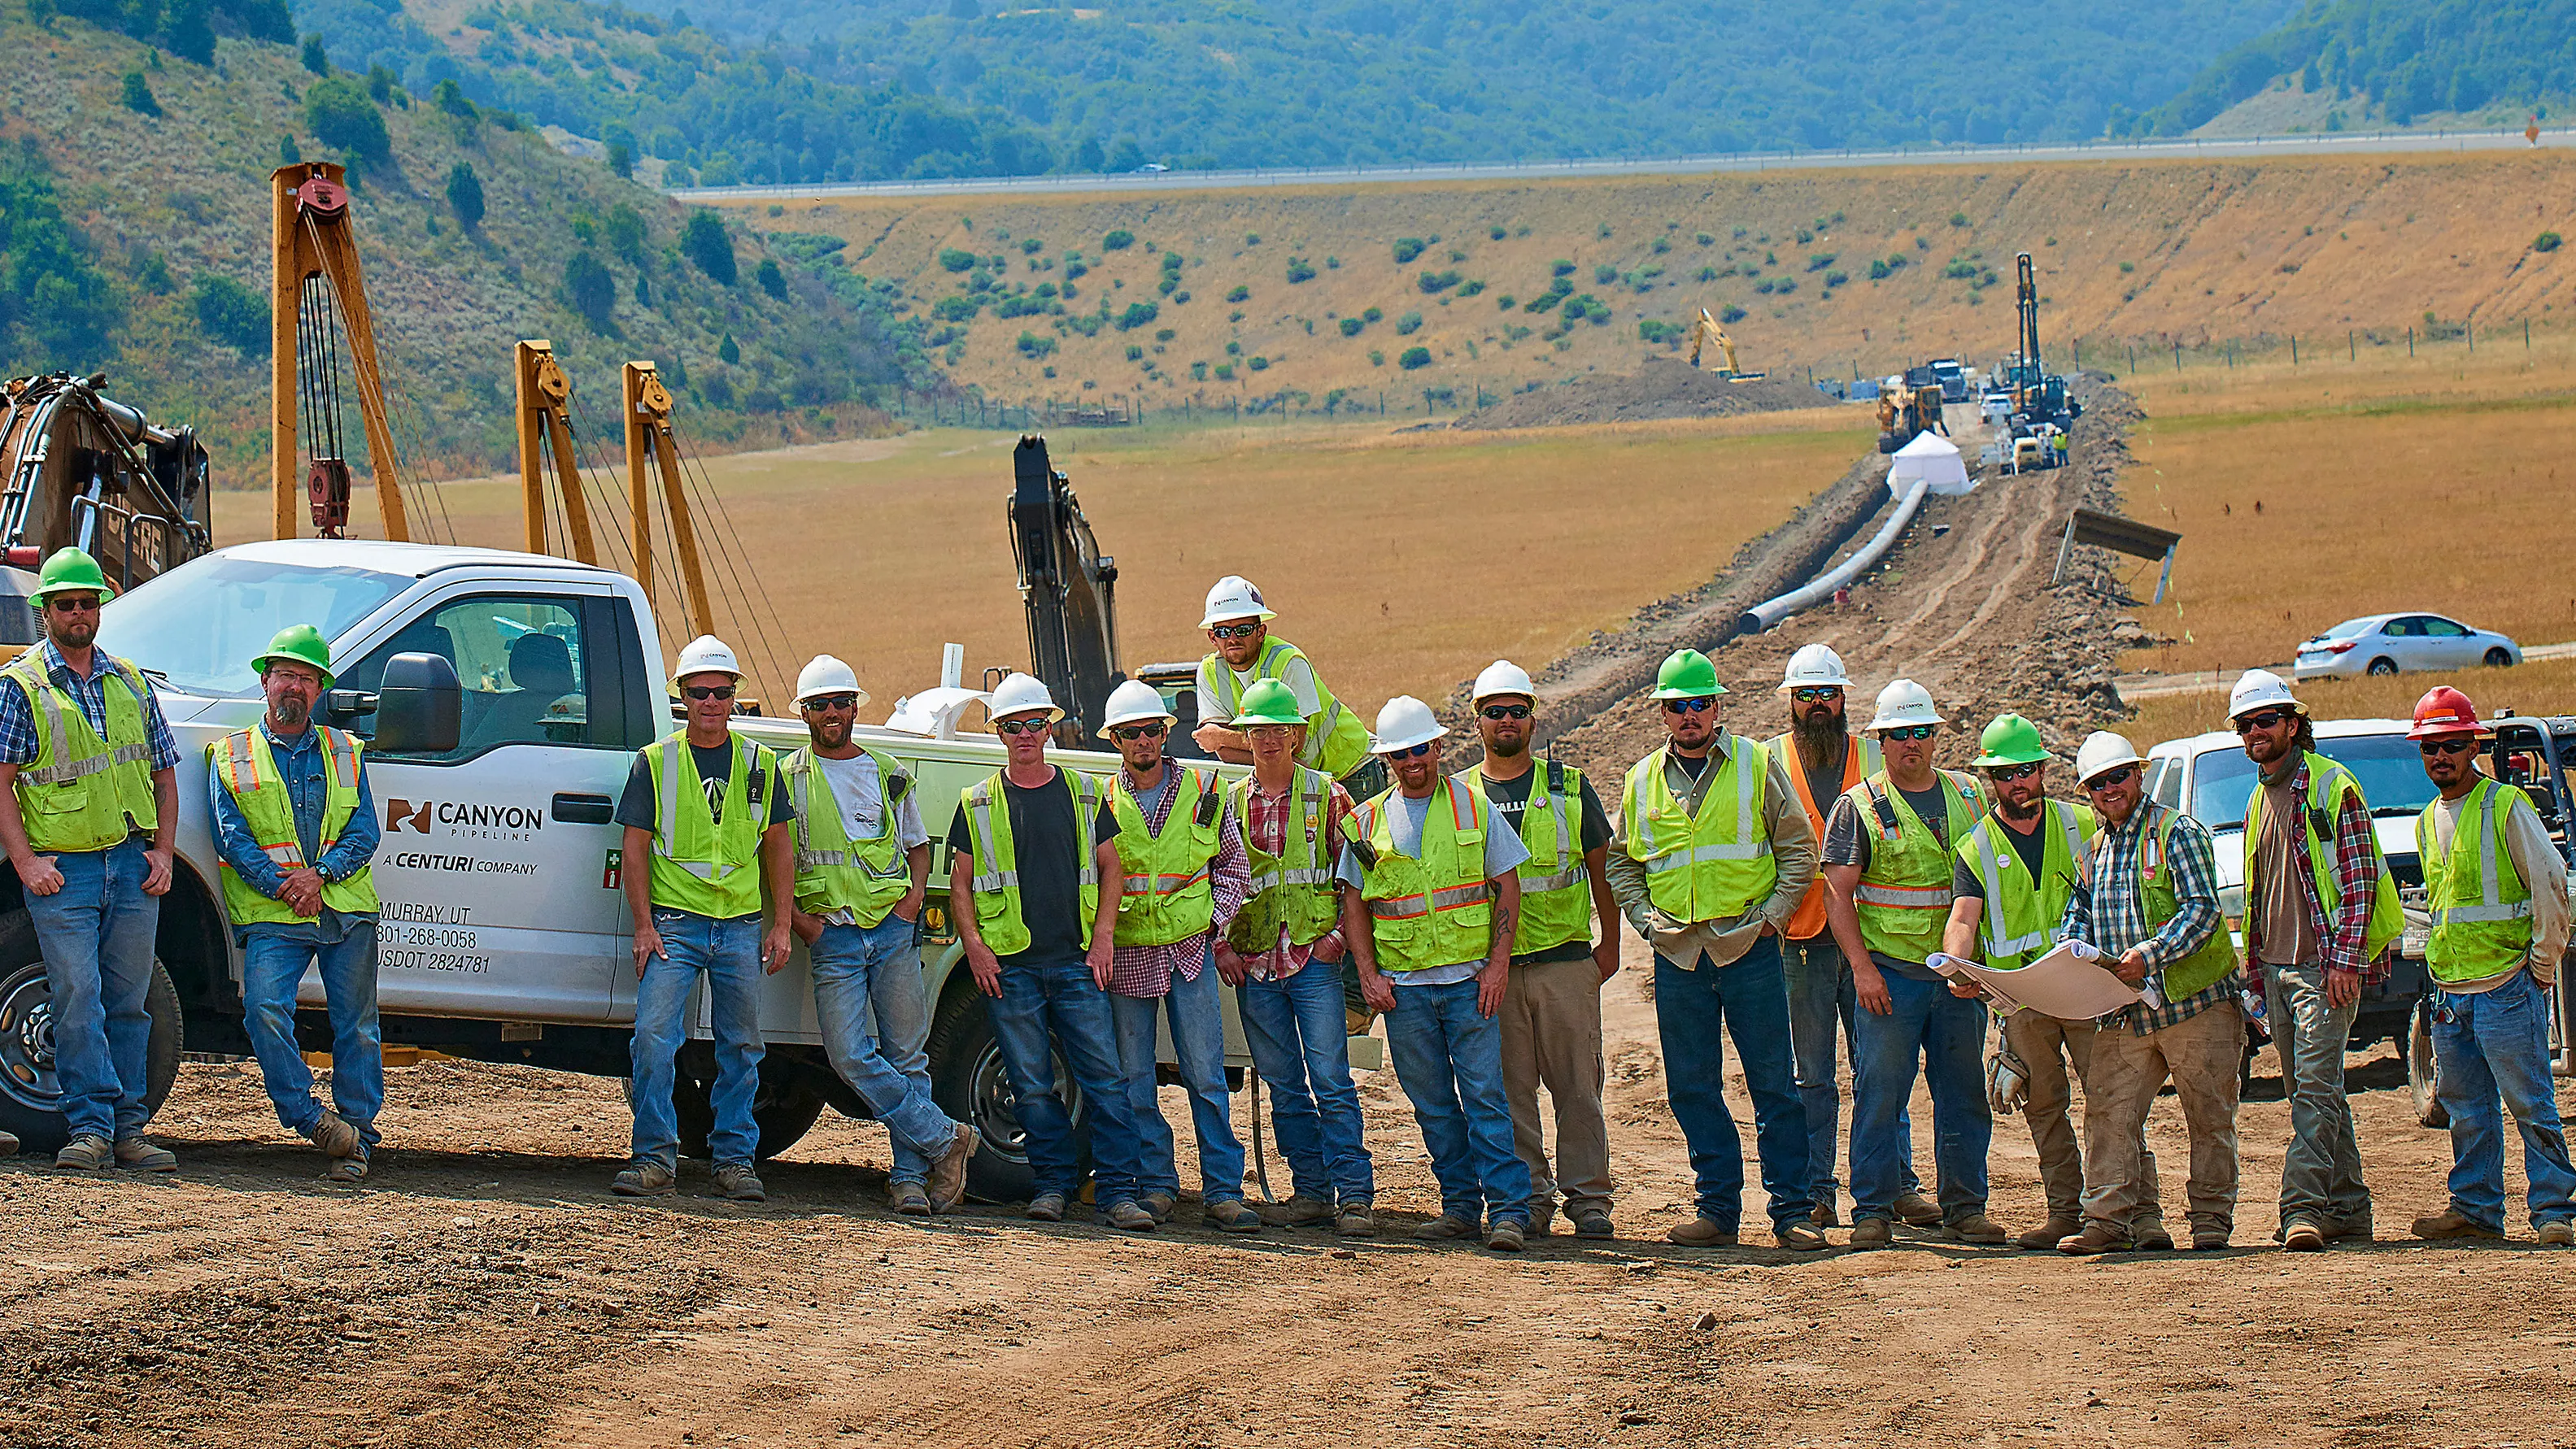 Workers posing for a picture at a work site